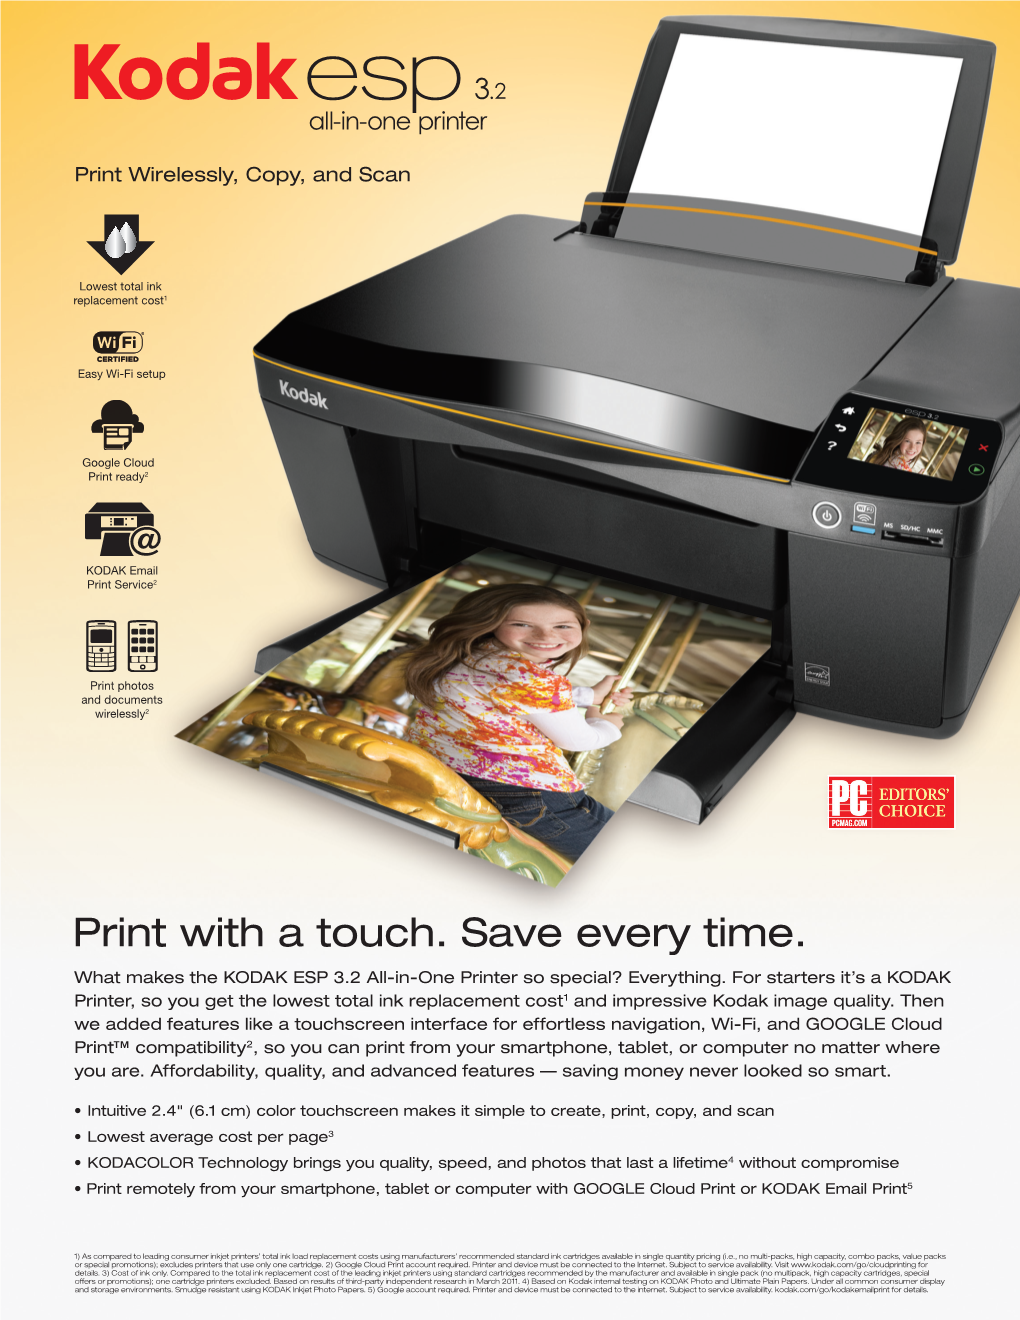 Print with a Touch. Save Every Time. What Makes the KODAK ESP 3.2 All-In-One Printer So Special? Everything